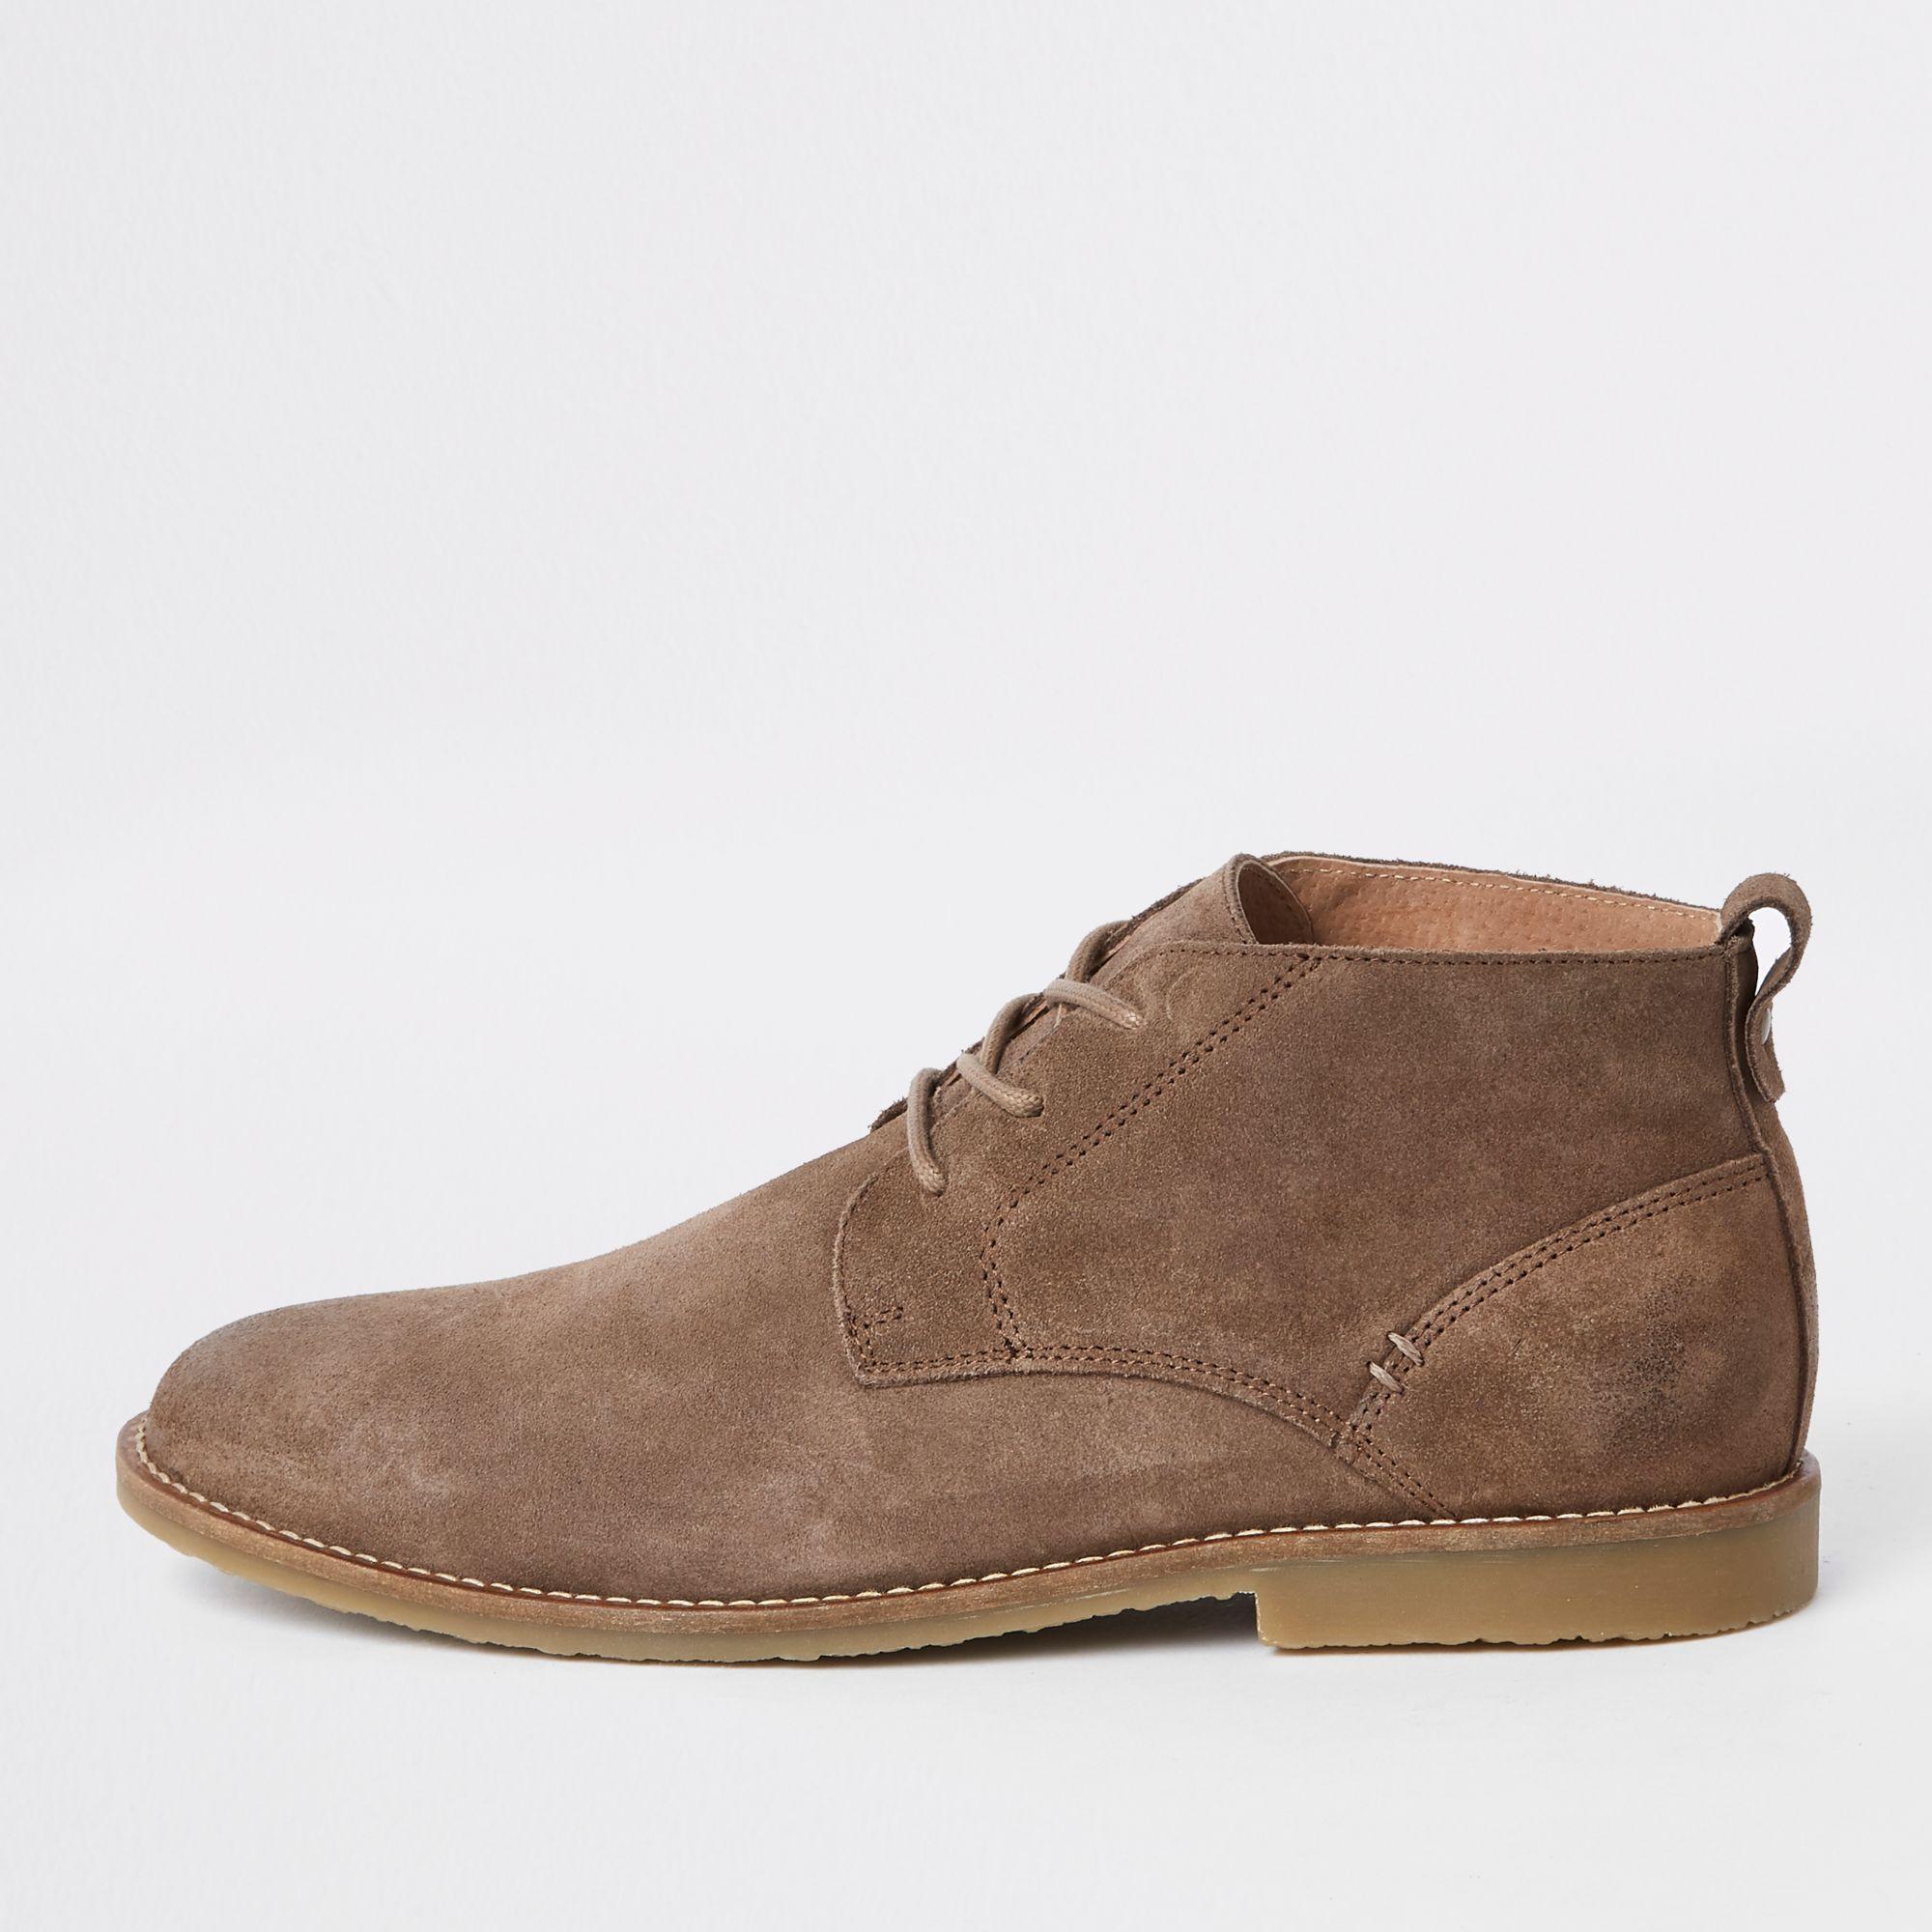 River Island Stone Suede Eyelet Chukka Boots in Brown for Men - Lyst